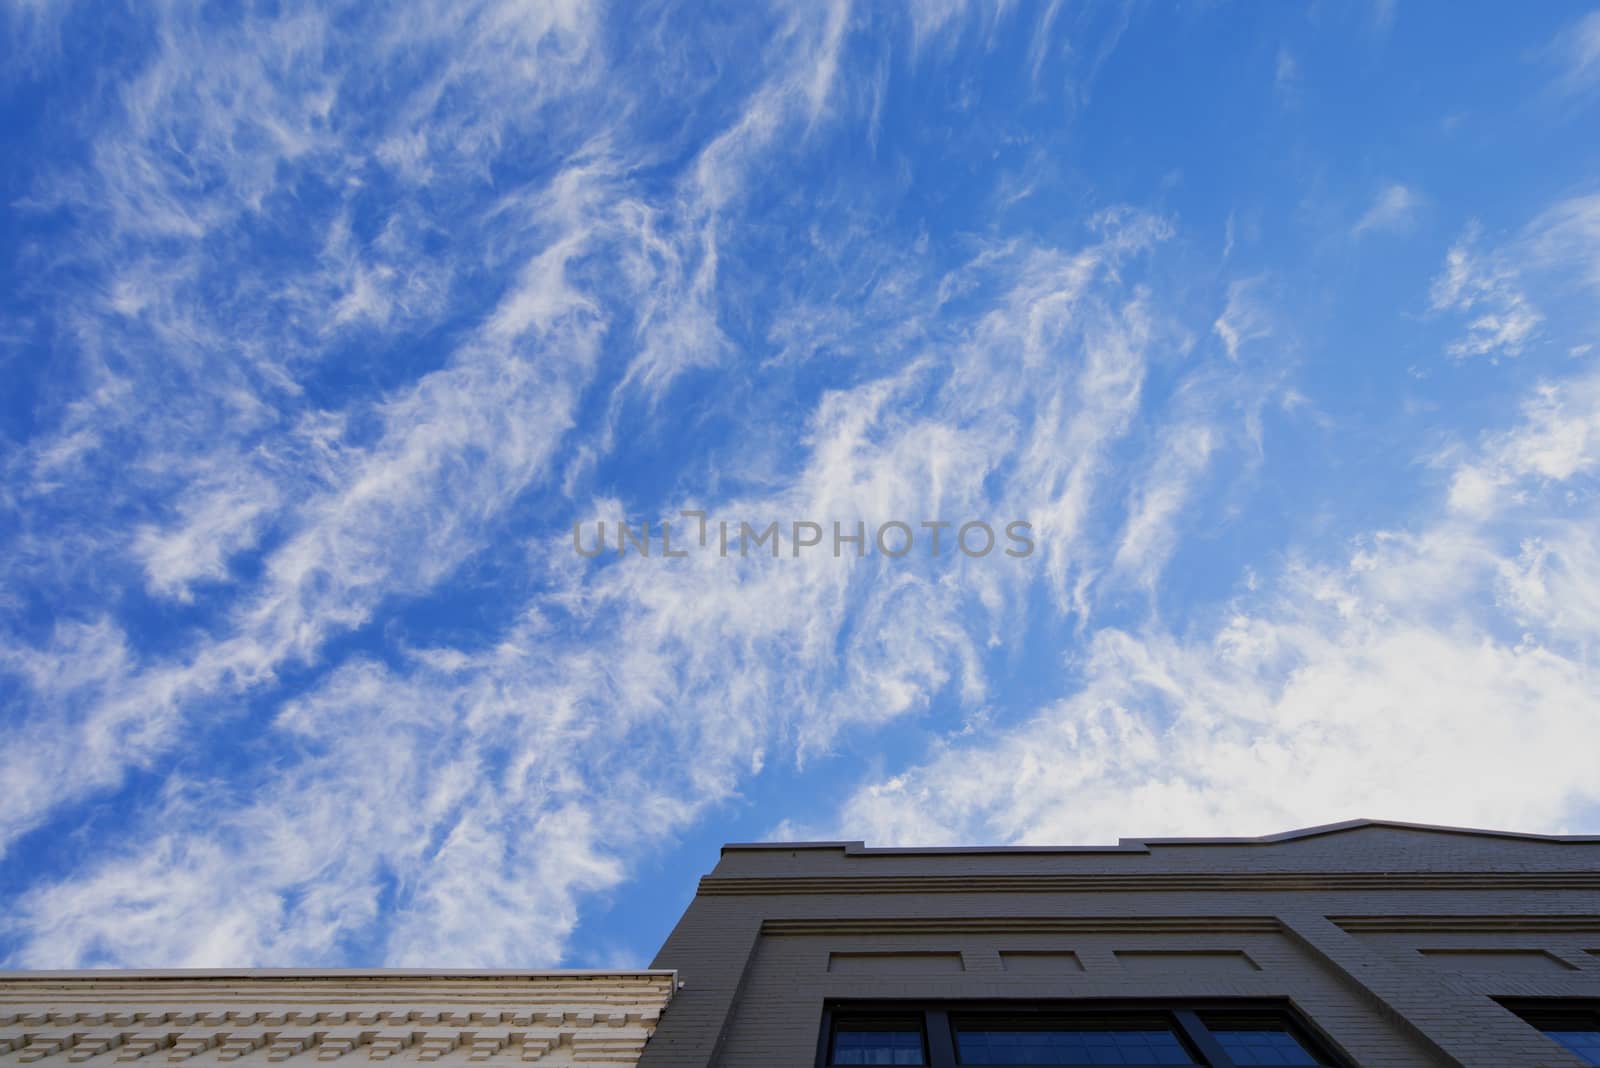 Cirrus clouds against a deep blue sky above old brick buidlings.